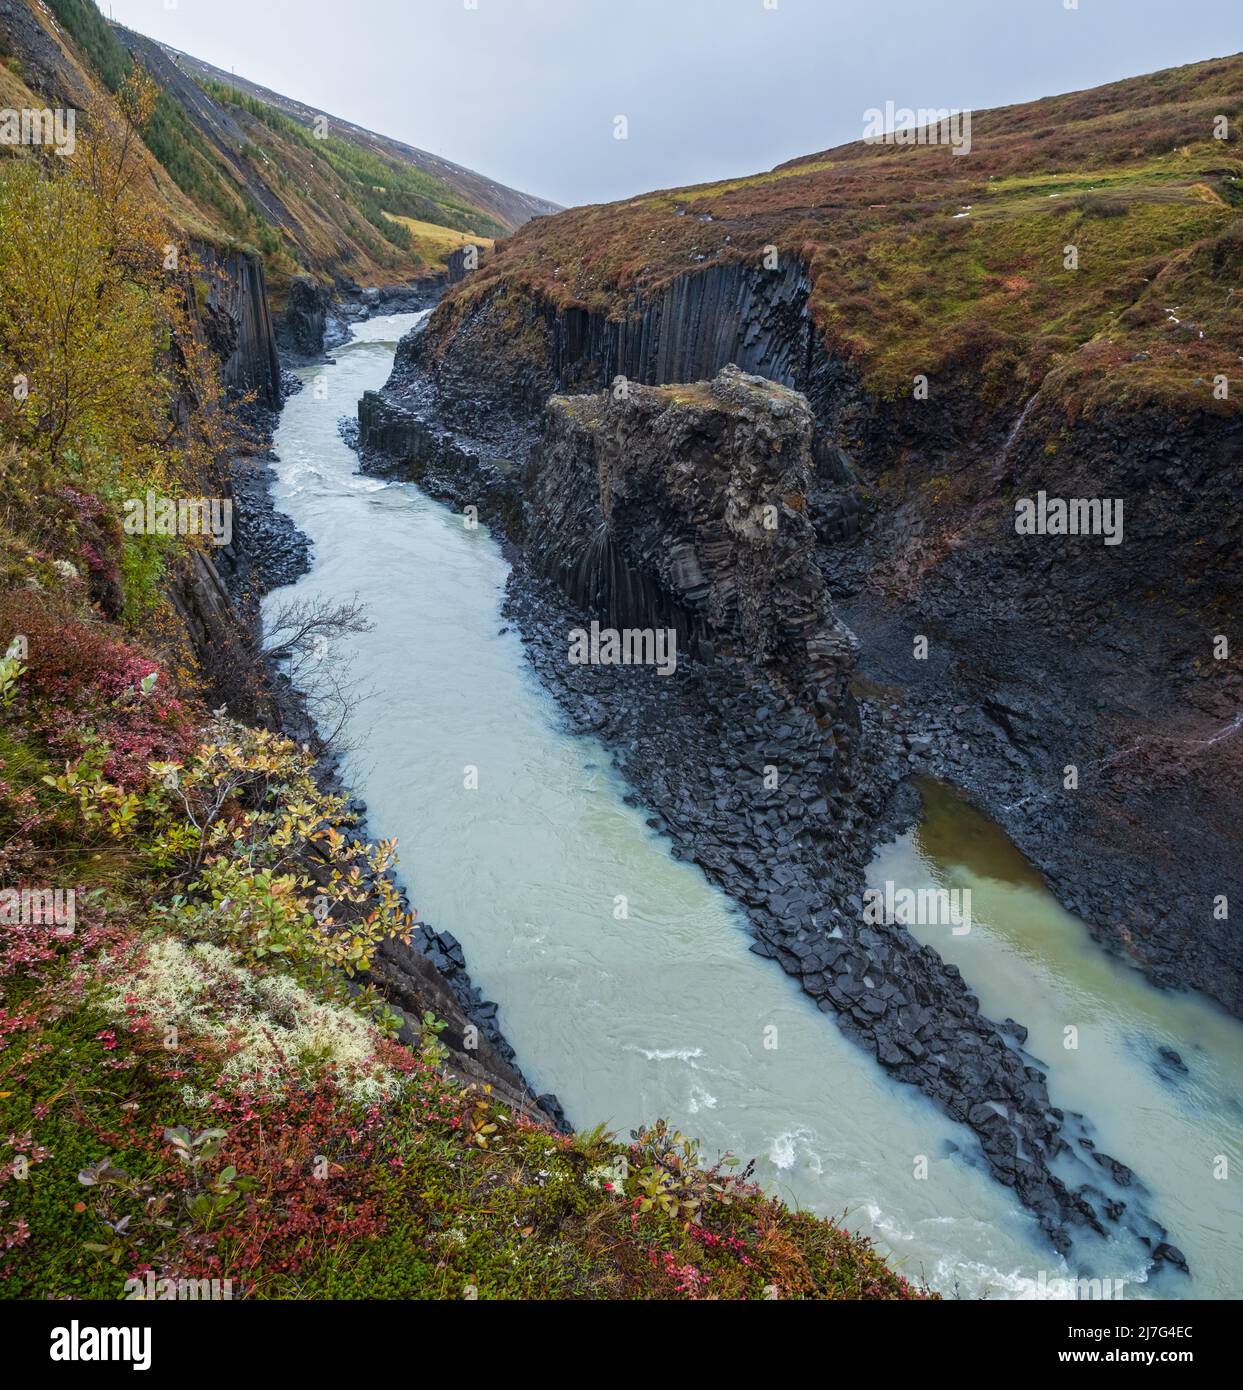 Autumn  picturesque Studlagil canyon is a ravine in Jokuldalur, Eastern Iceland. Famous columnar basalt rock formations and Jokla river runs through i Stock Photo